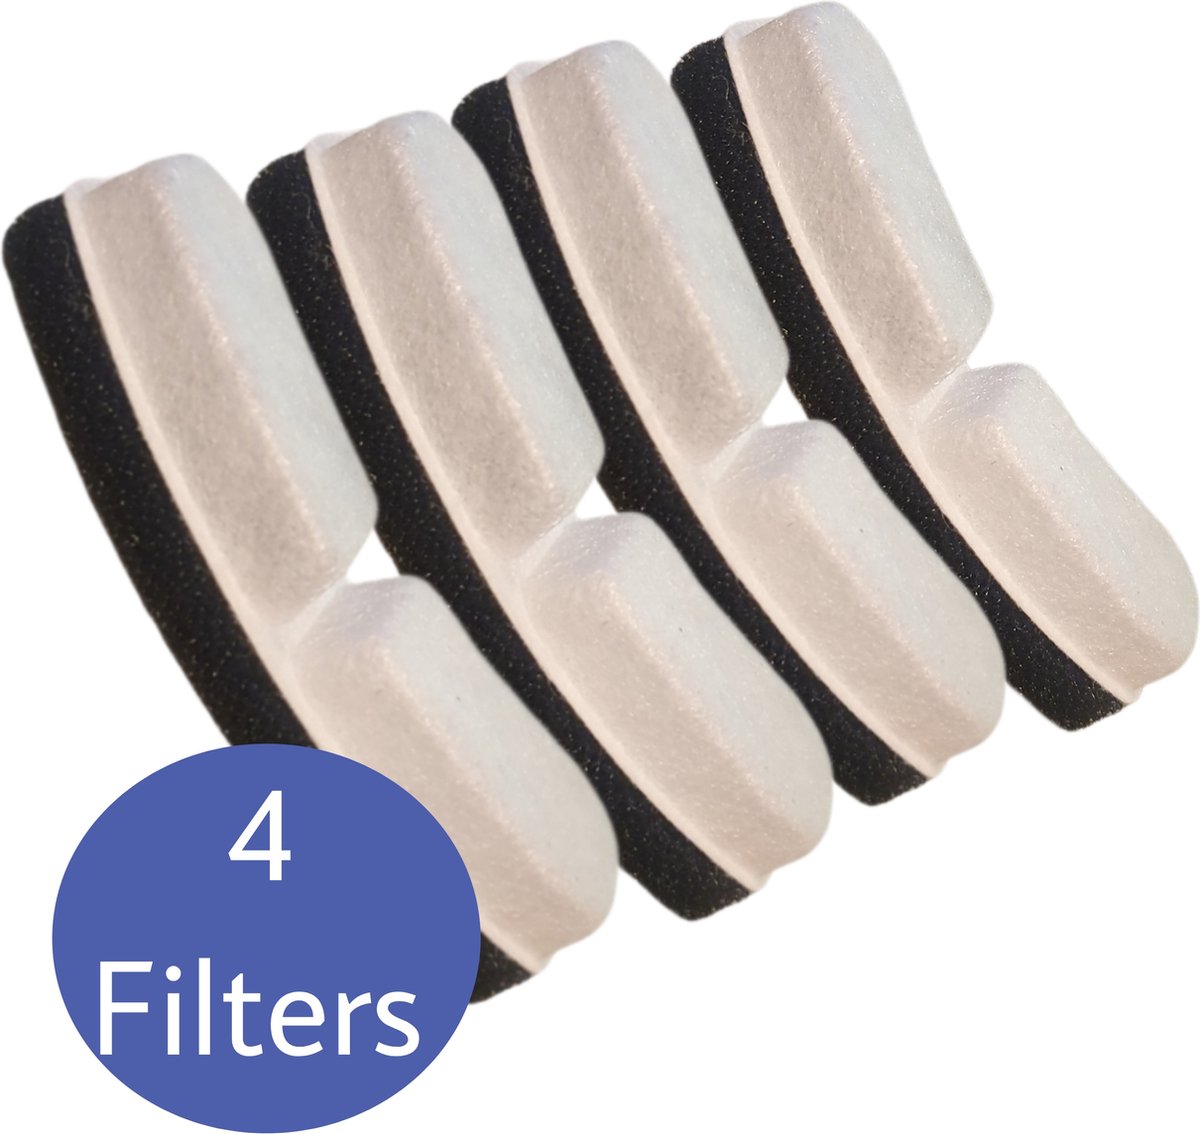 By Fredge Drinkfontein Filters 4 stuks - 4 Filters Geschikt Voor De By Fredge Drinkfontein